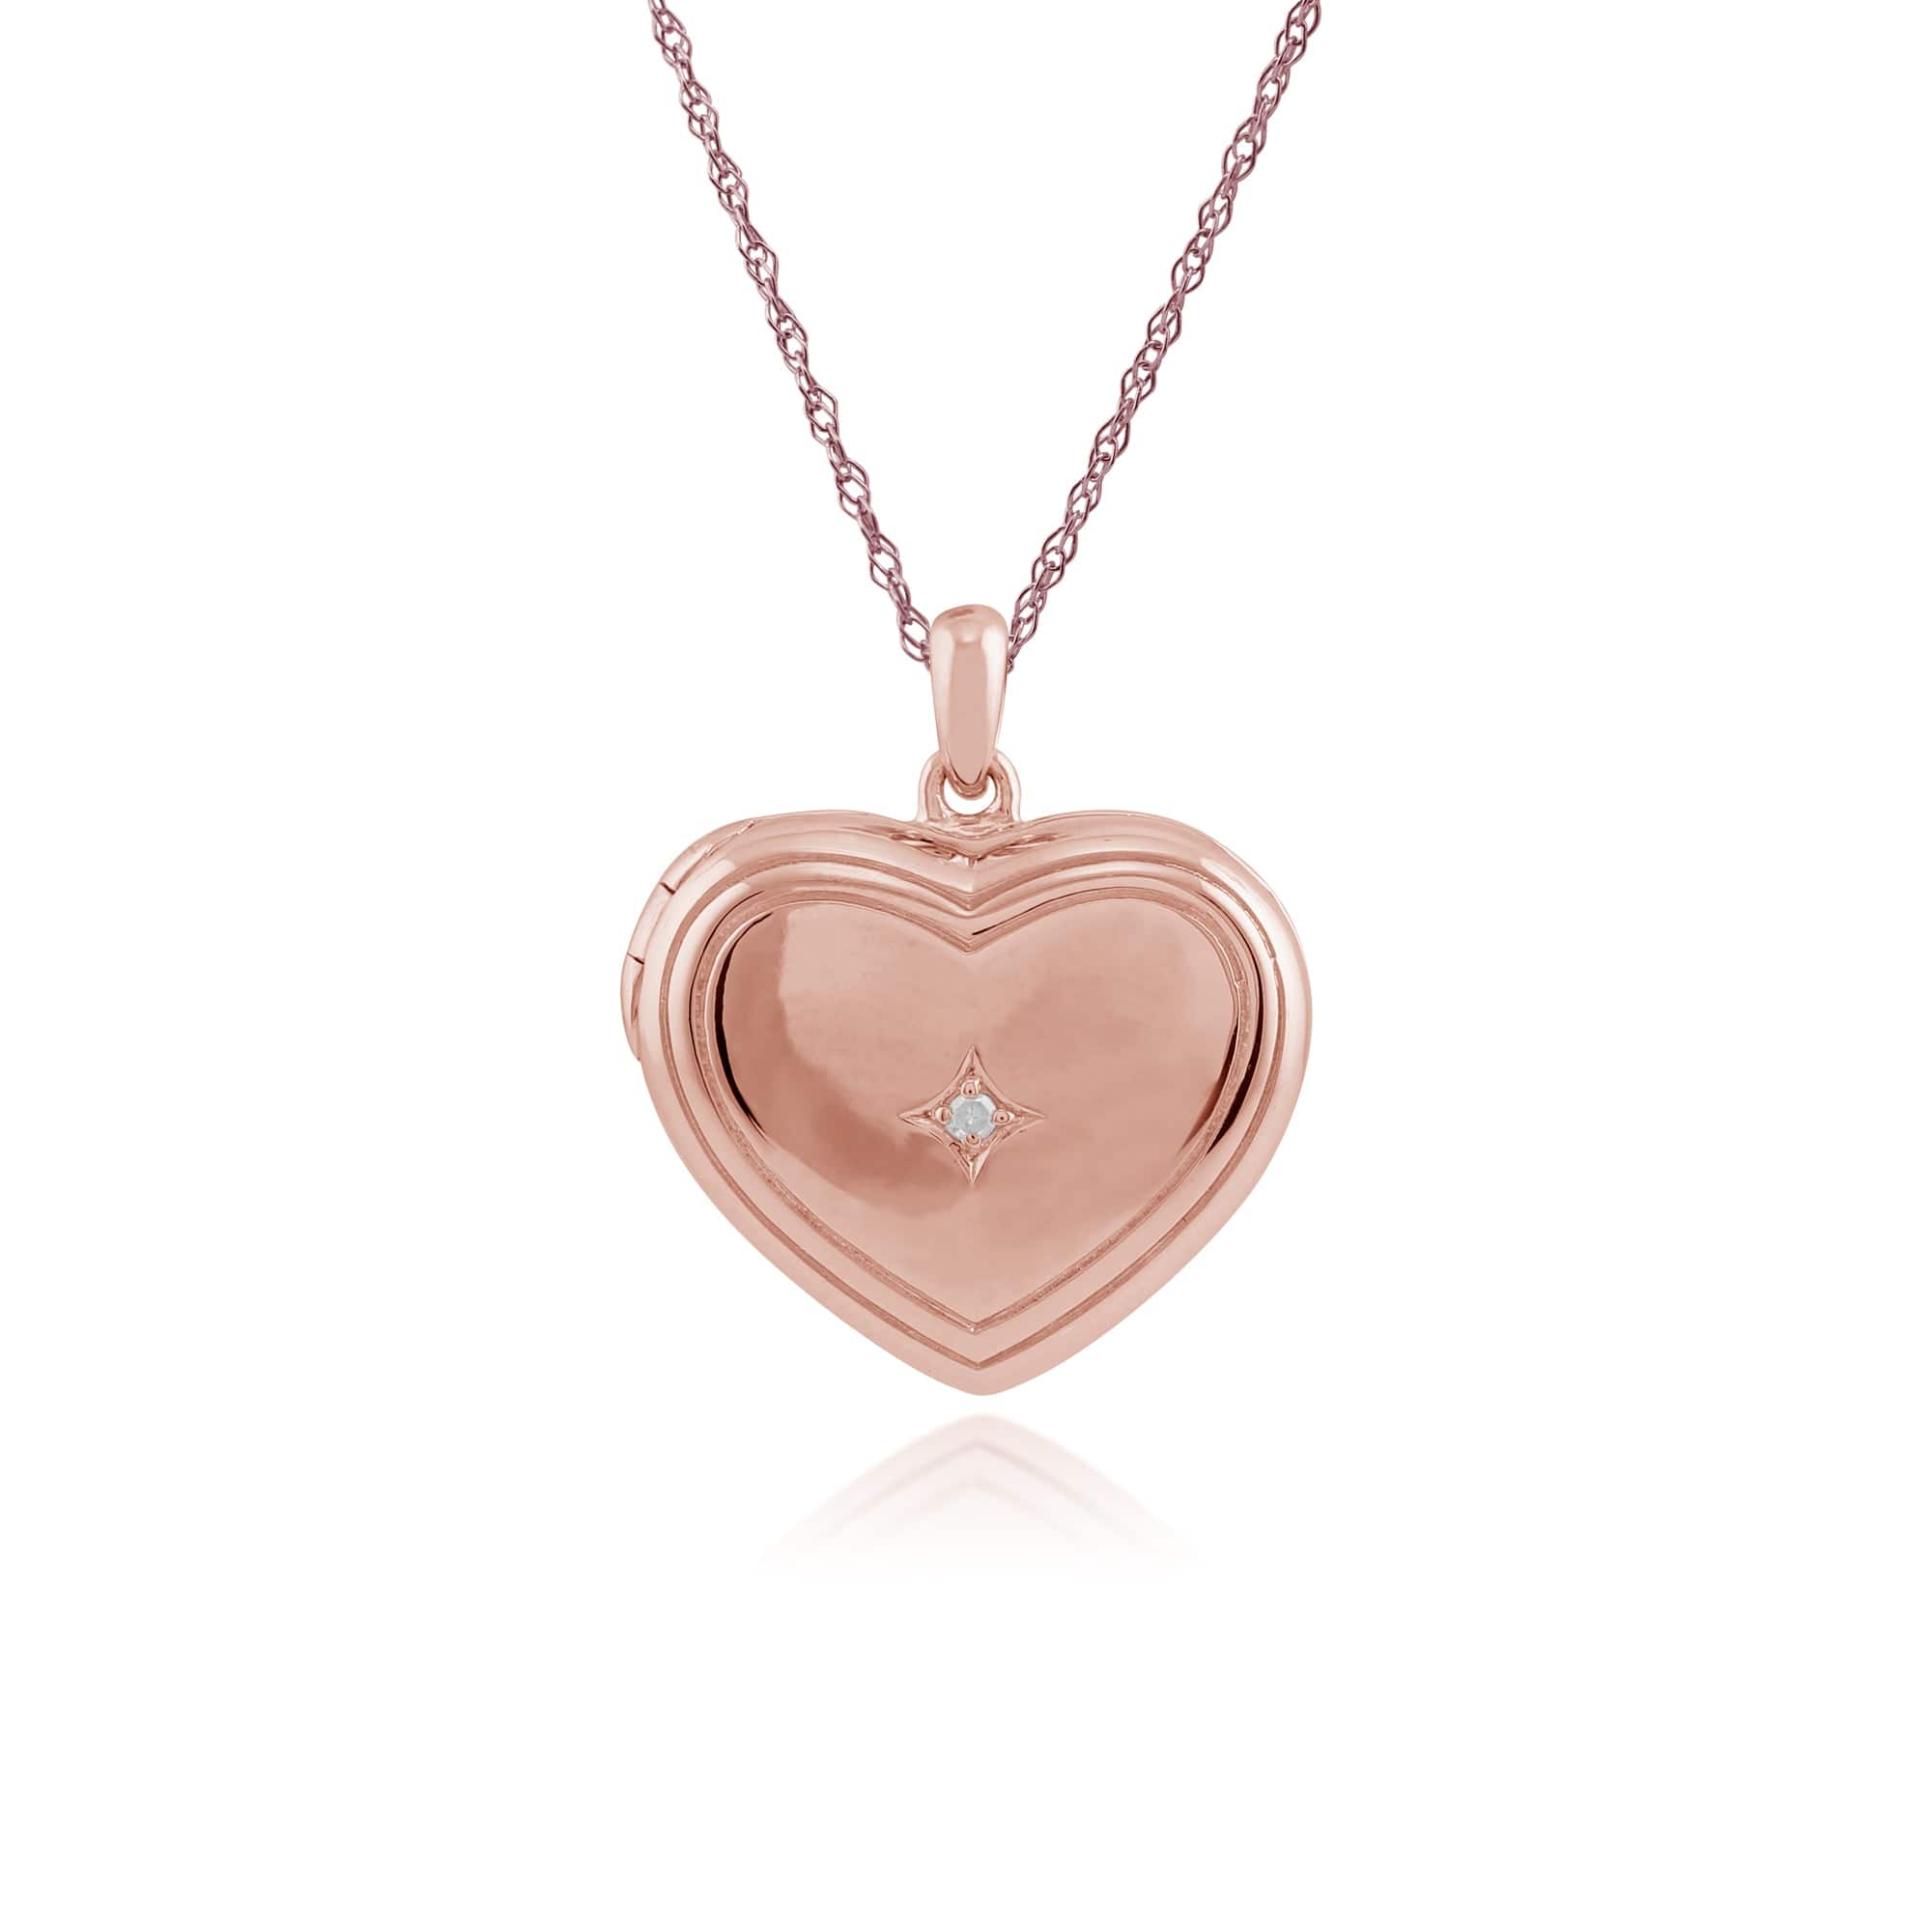 Classic Round Diamond Heart Shaped Locket in Rose Gold Plated Sterling Silver - Gemondo